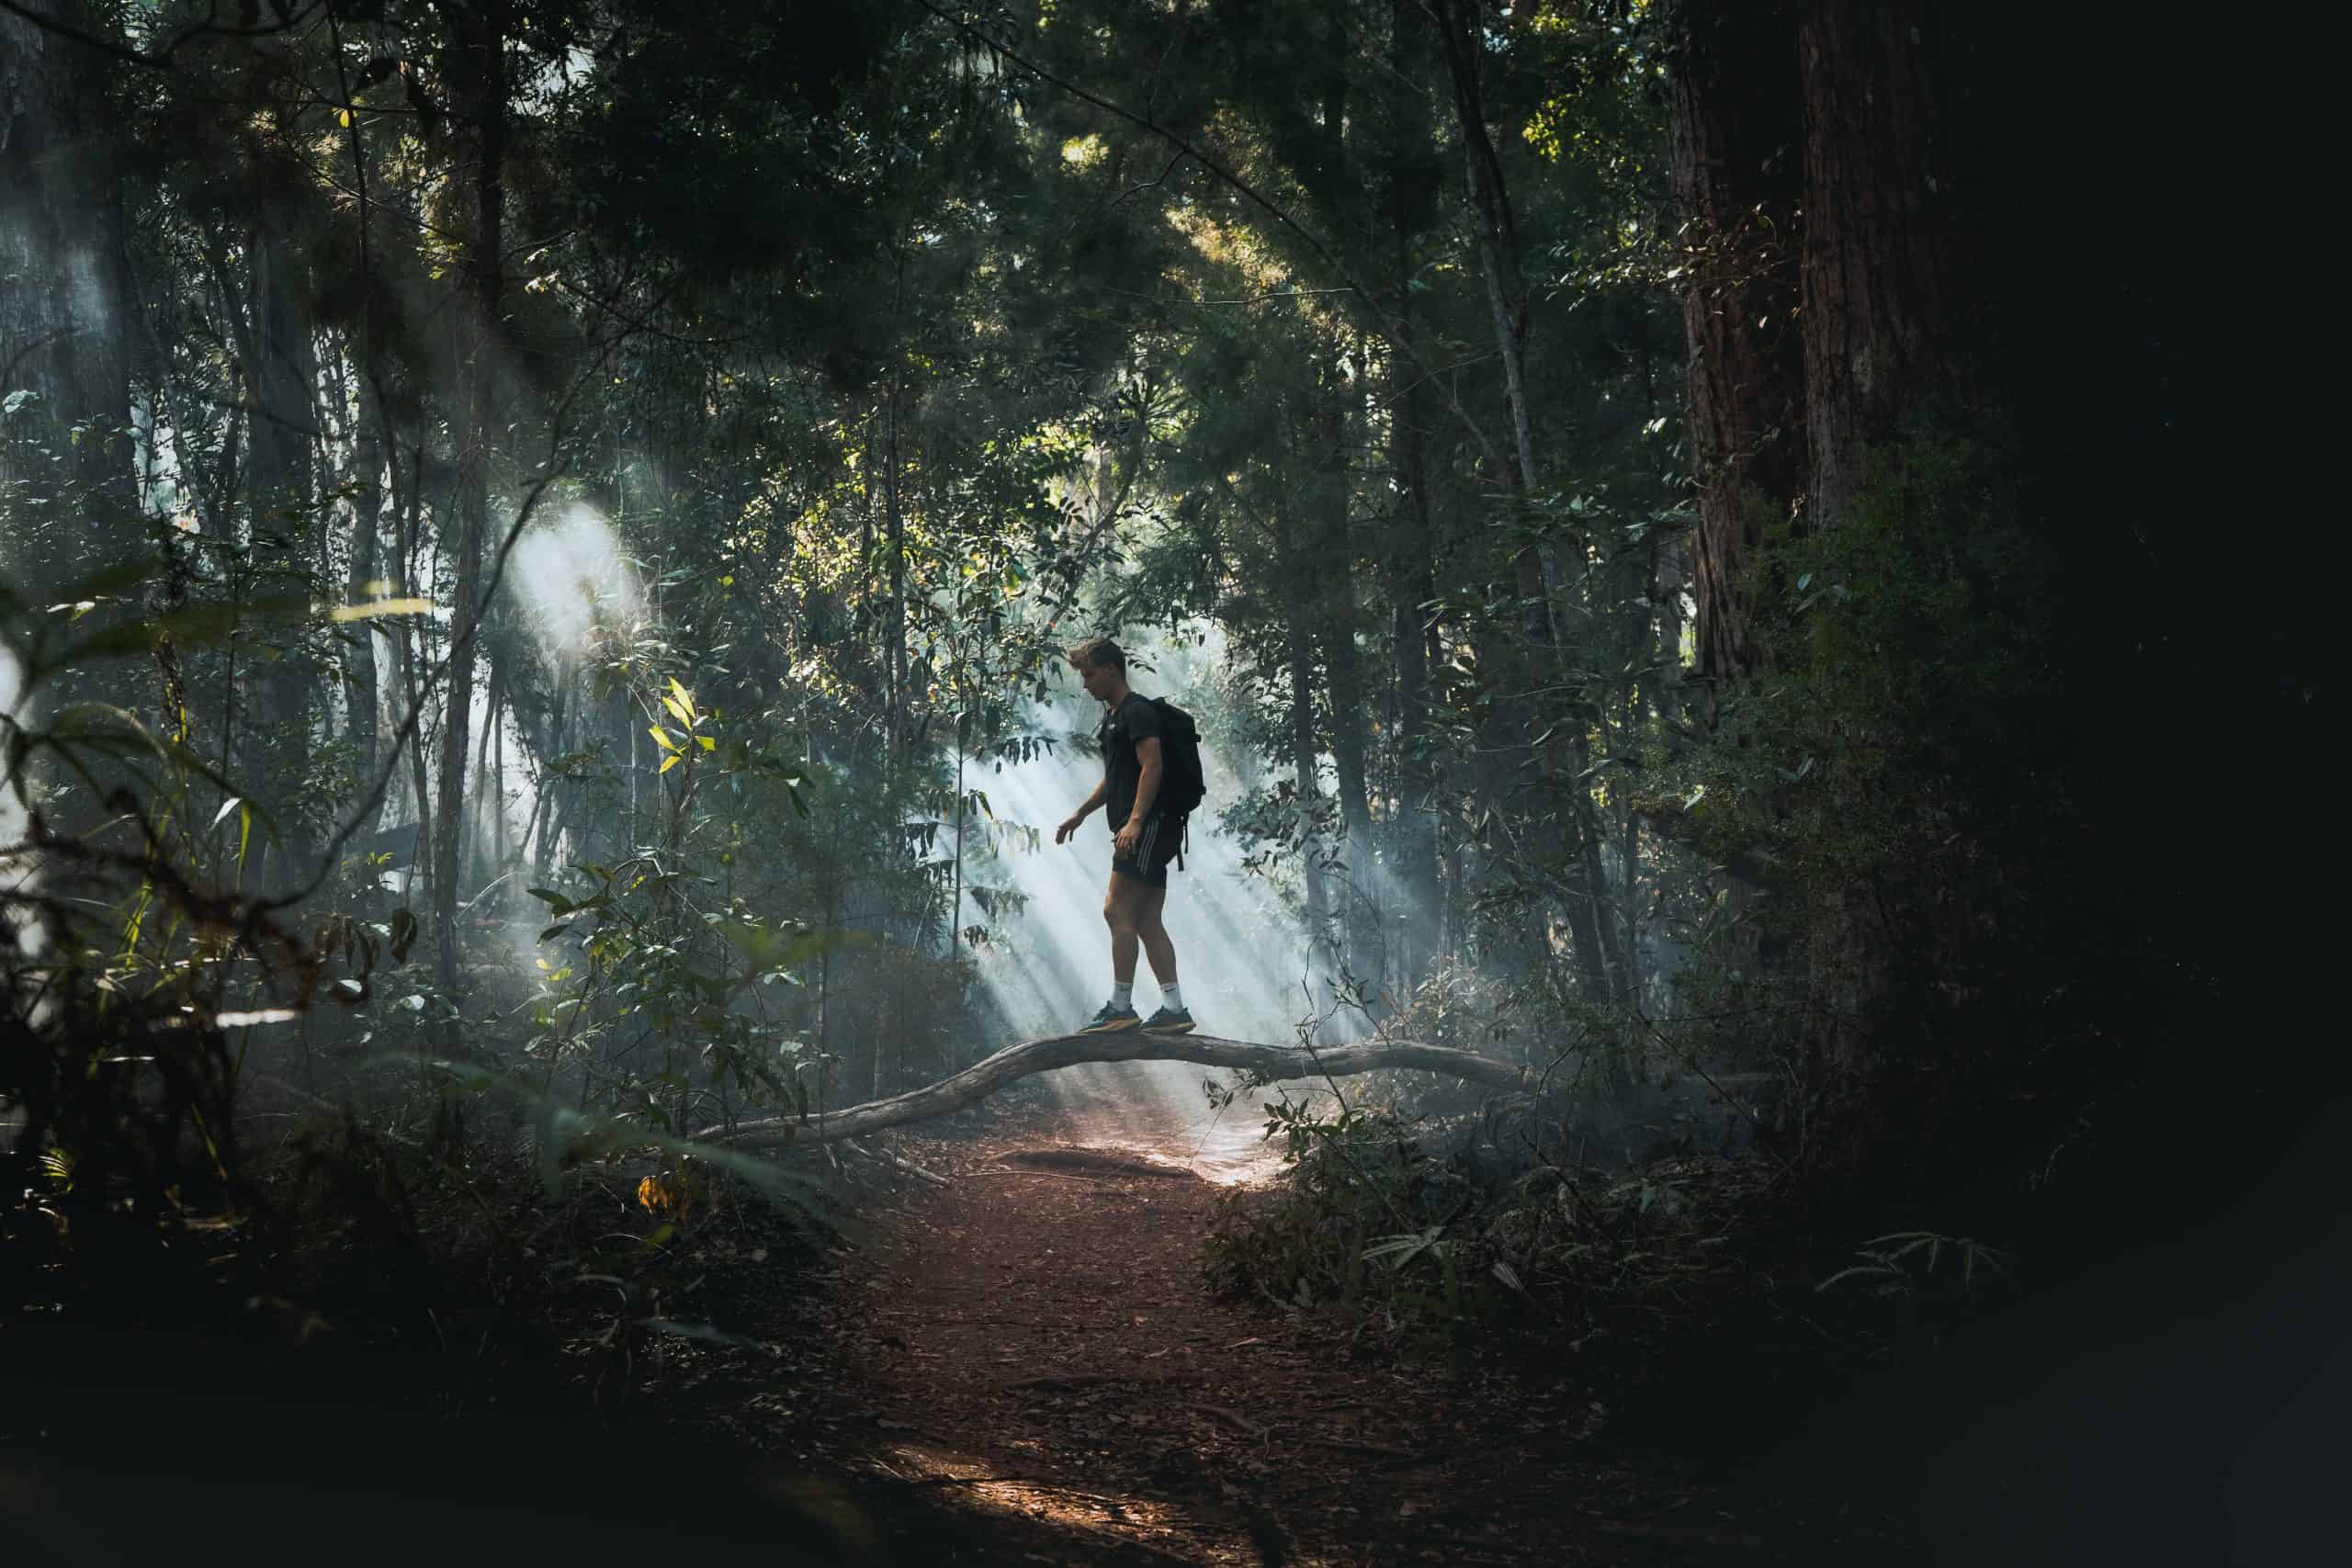 a person standing on a fallen tree in a forest.